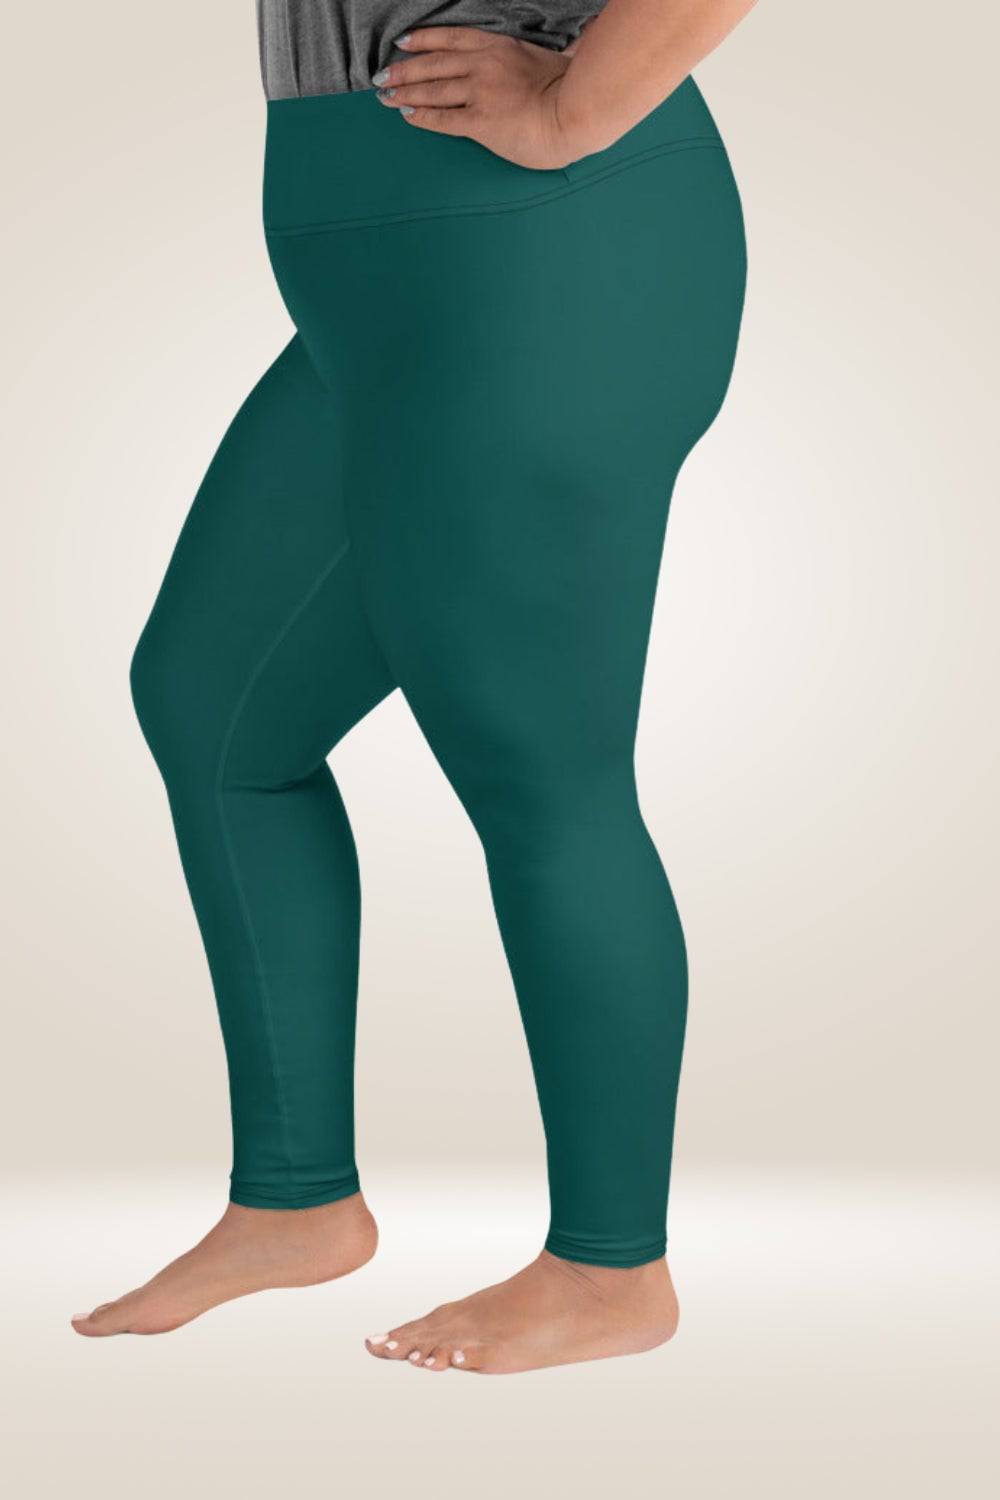 Forest Green High Waisted Plus Size Leggings - TGC Boutique -